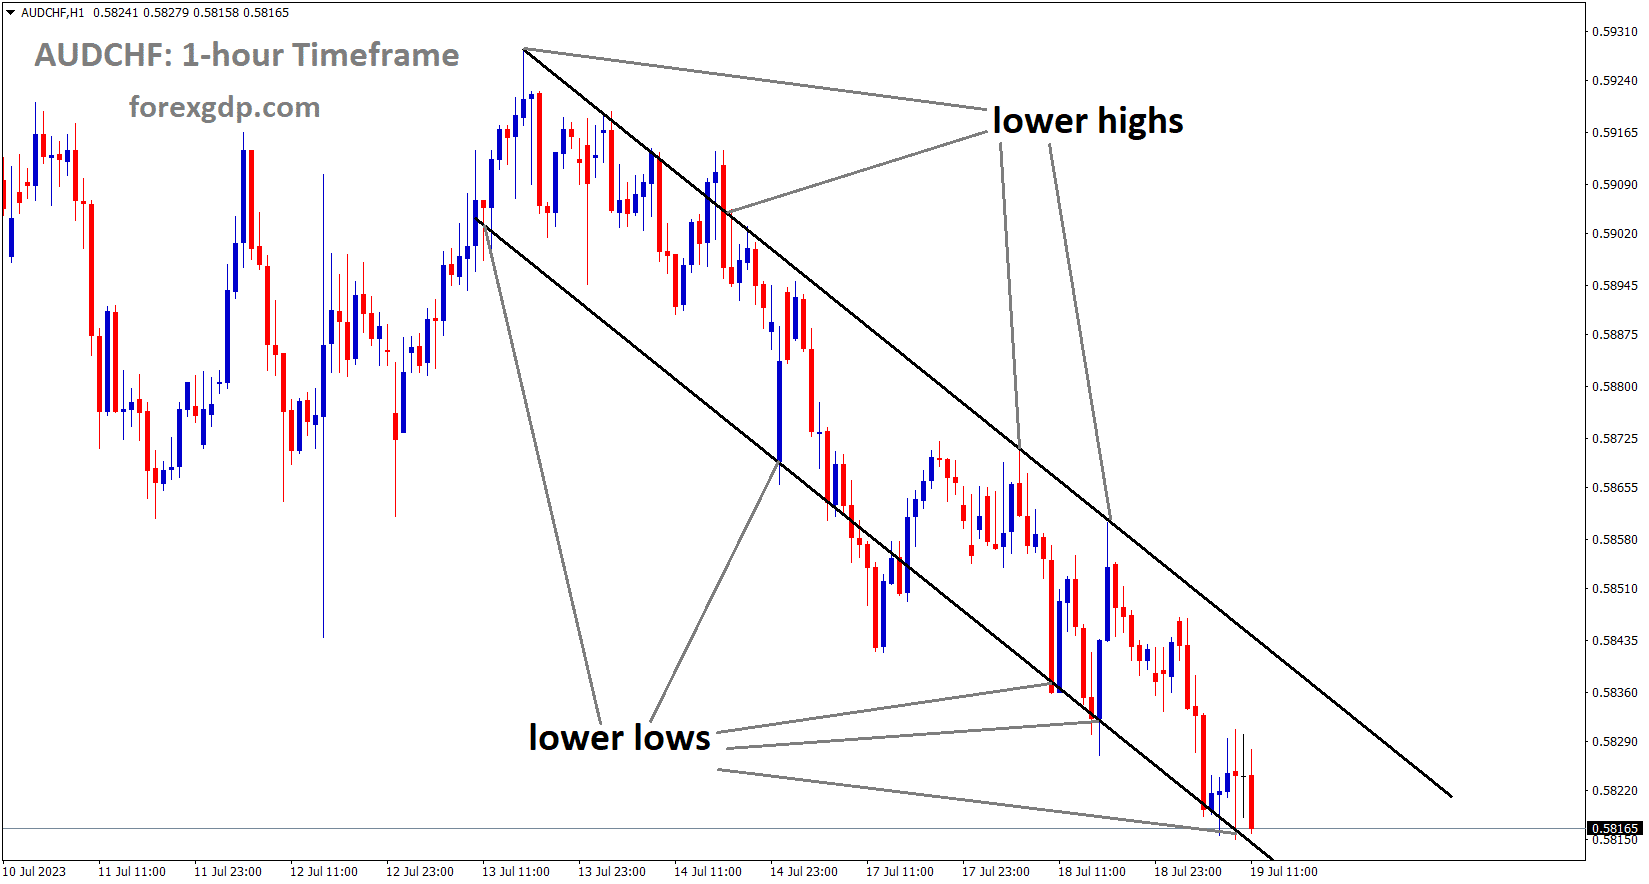 AUDCHF is moving in the Descending channel and the market has reached the lower low area of the channel